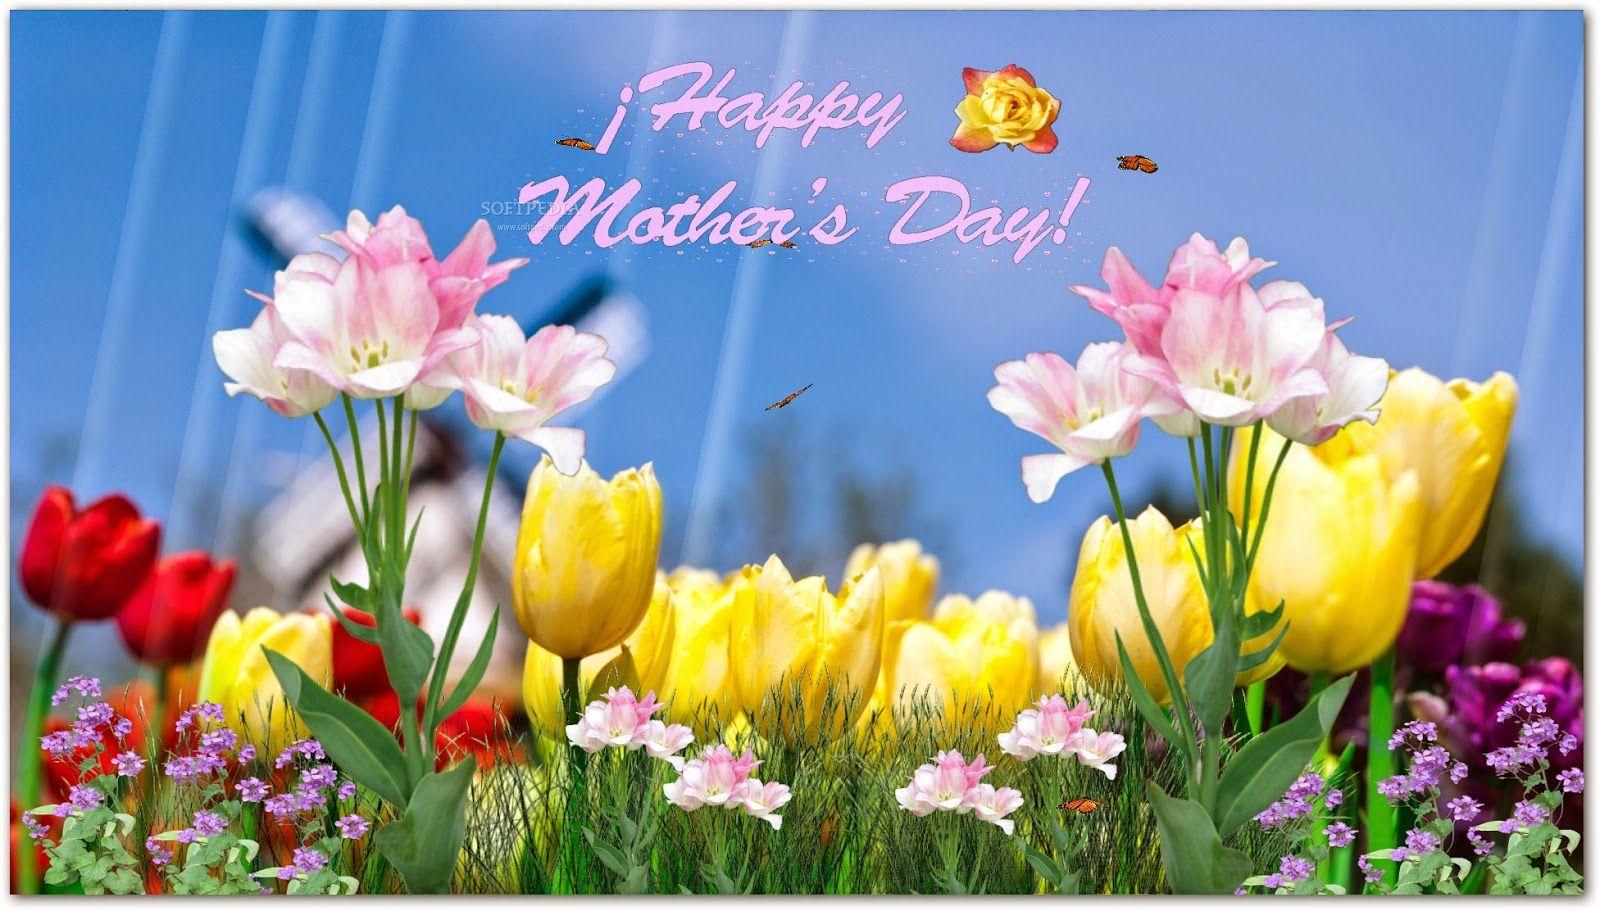 Happy Mothers Day 2018 Image, Wallpaper, Picture, Photo, Pics